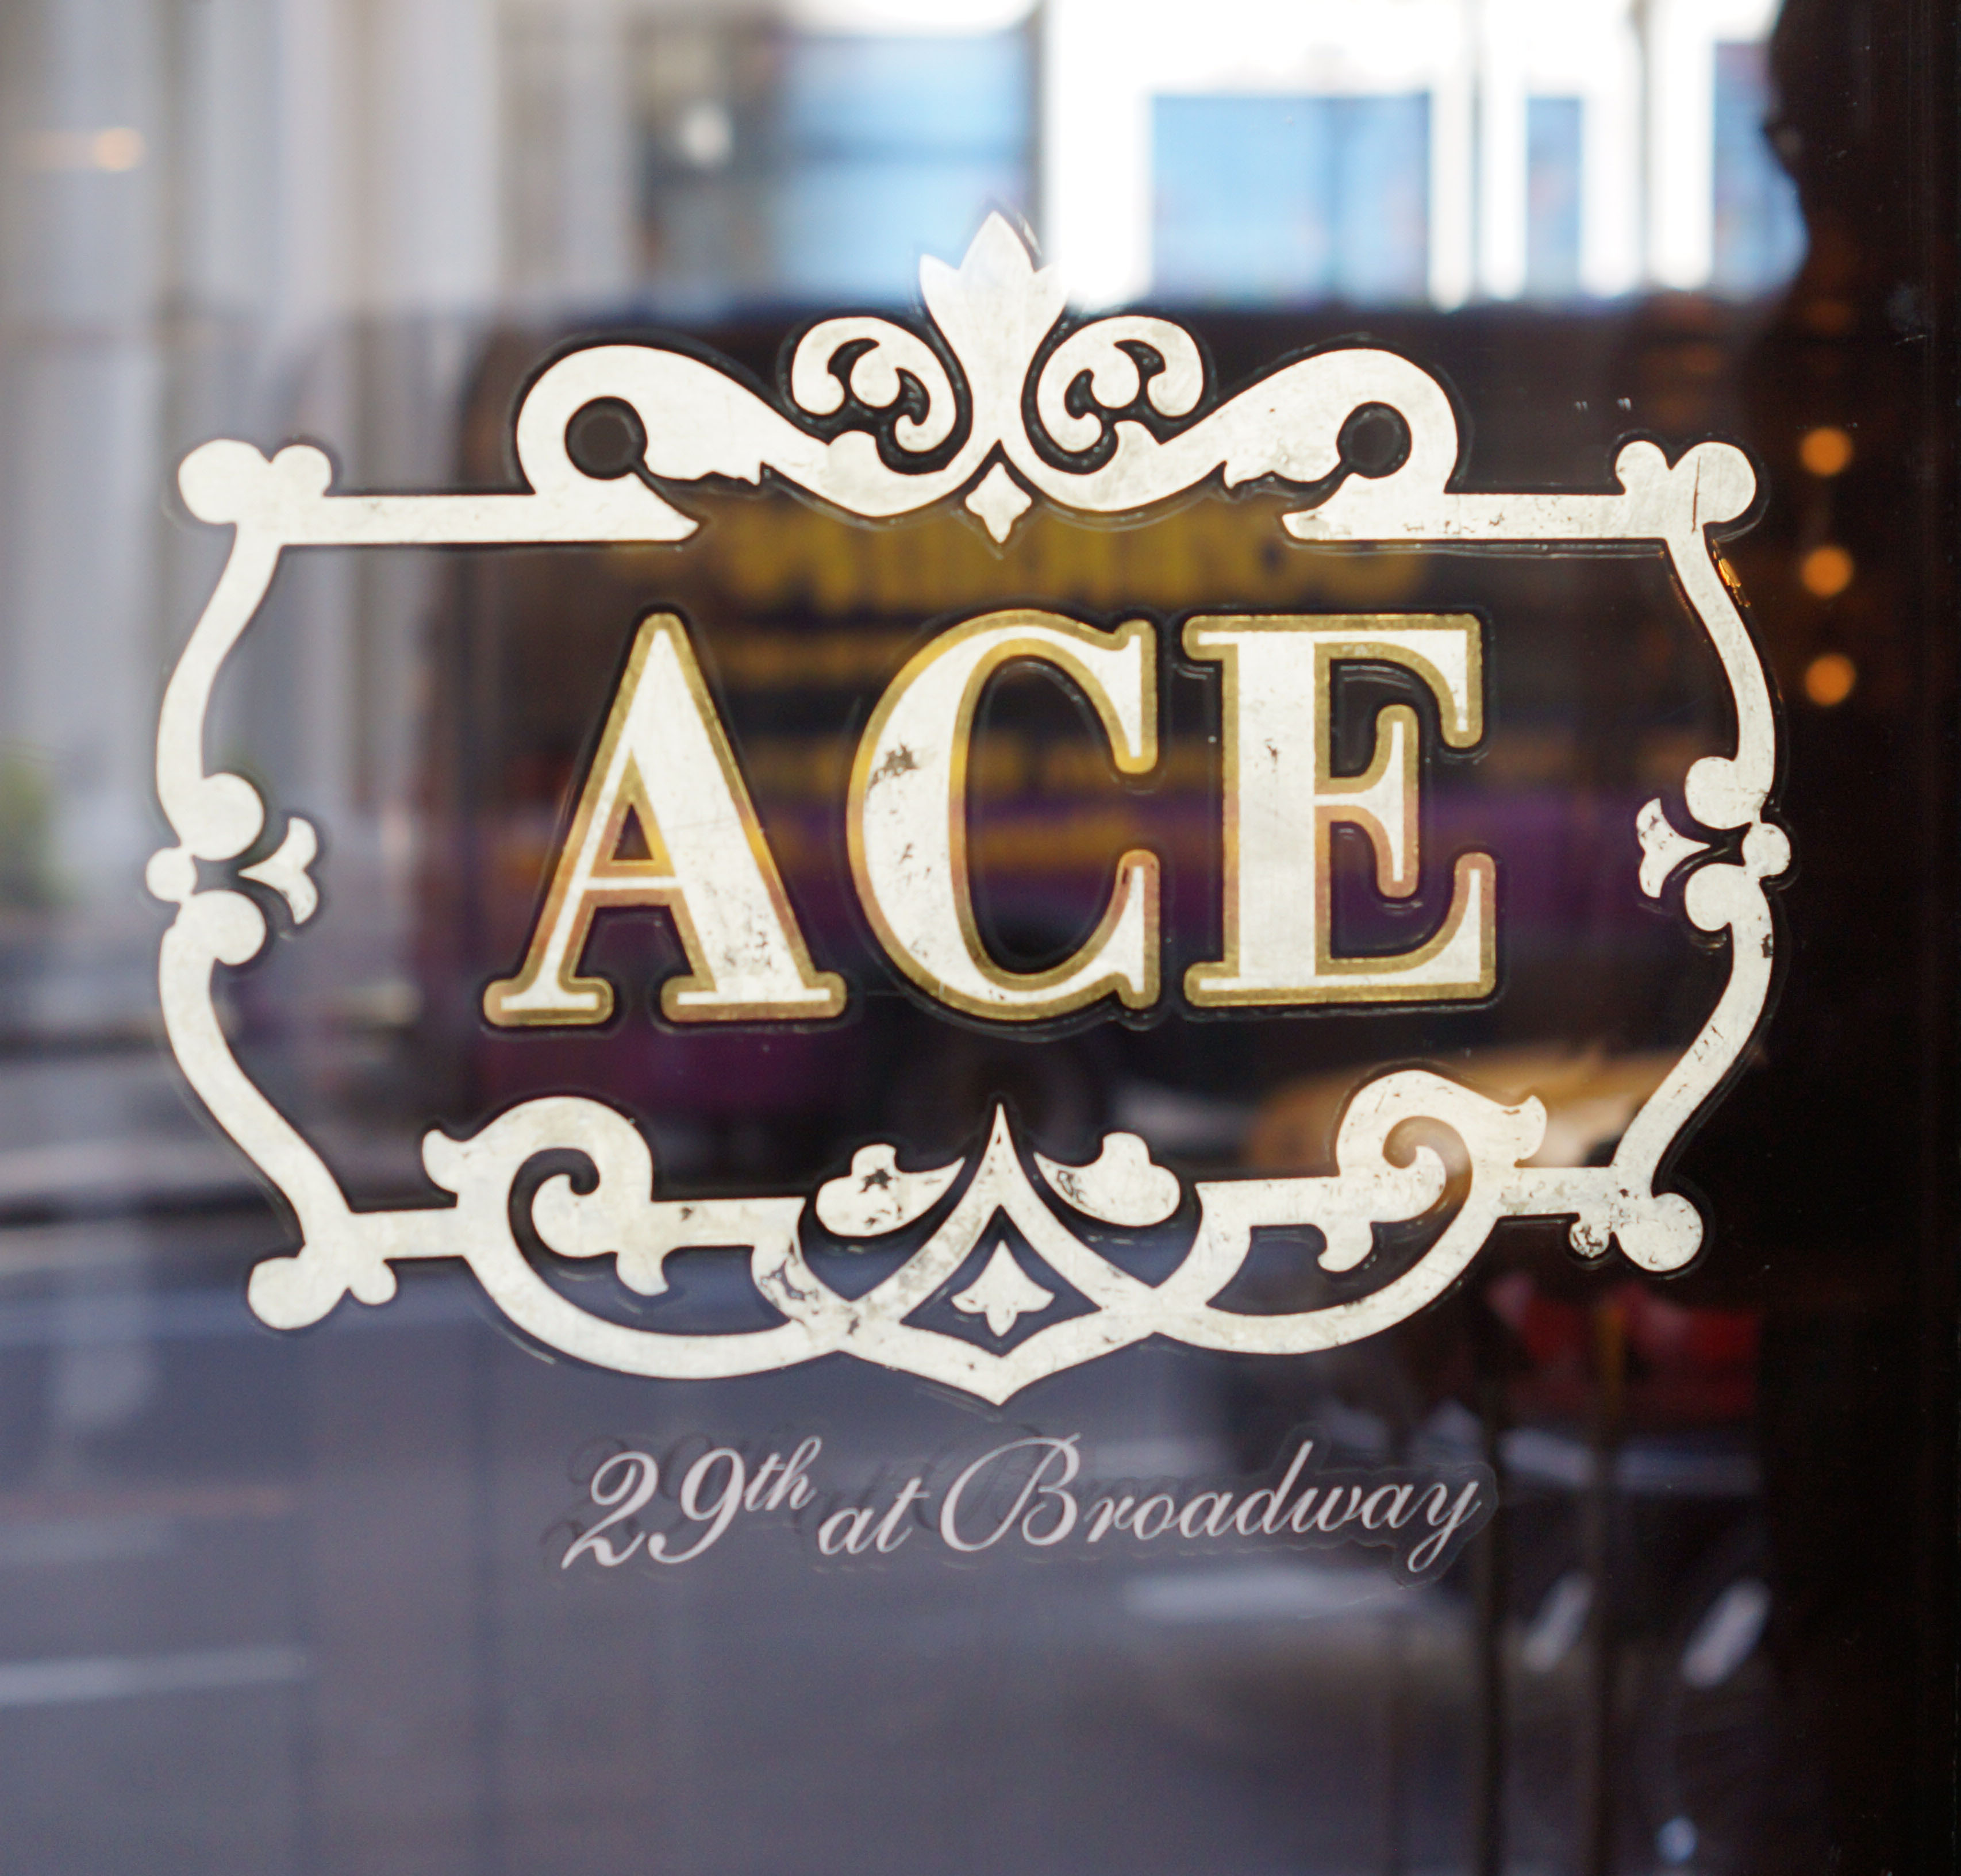 Sign for The Ace Hotel